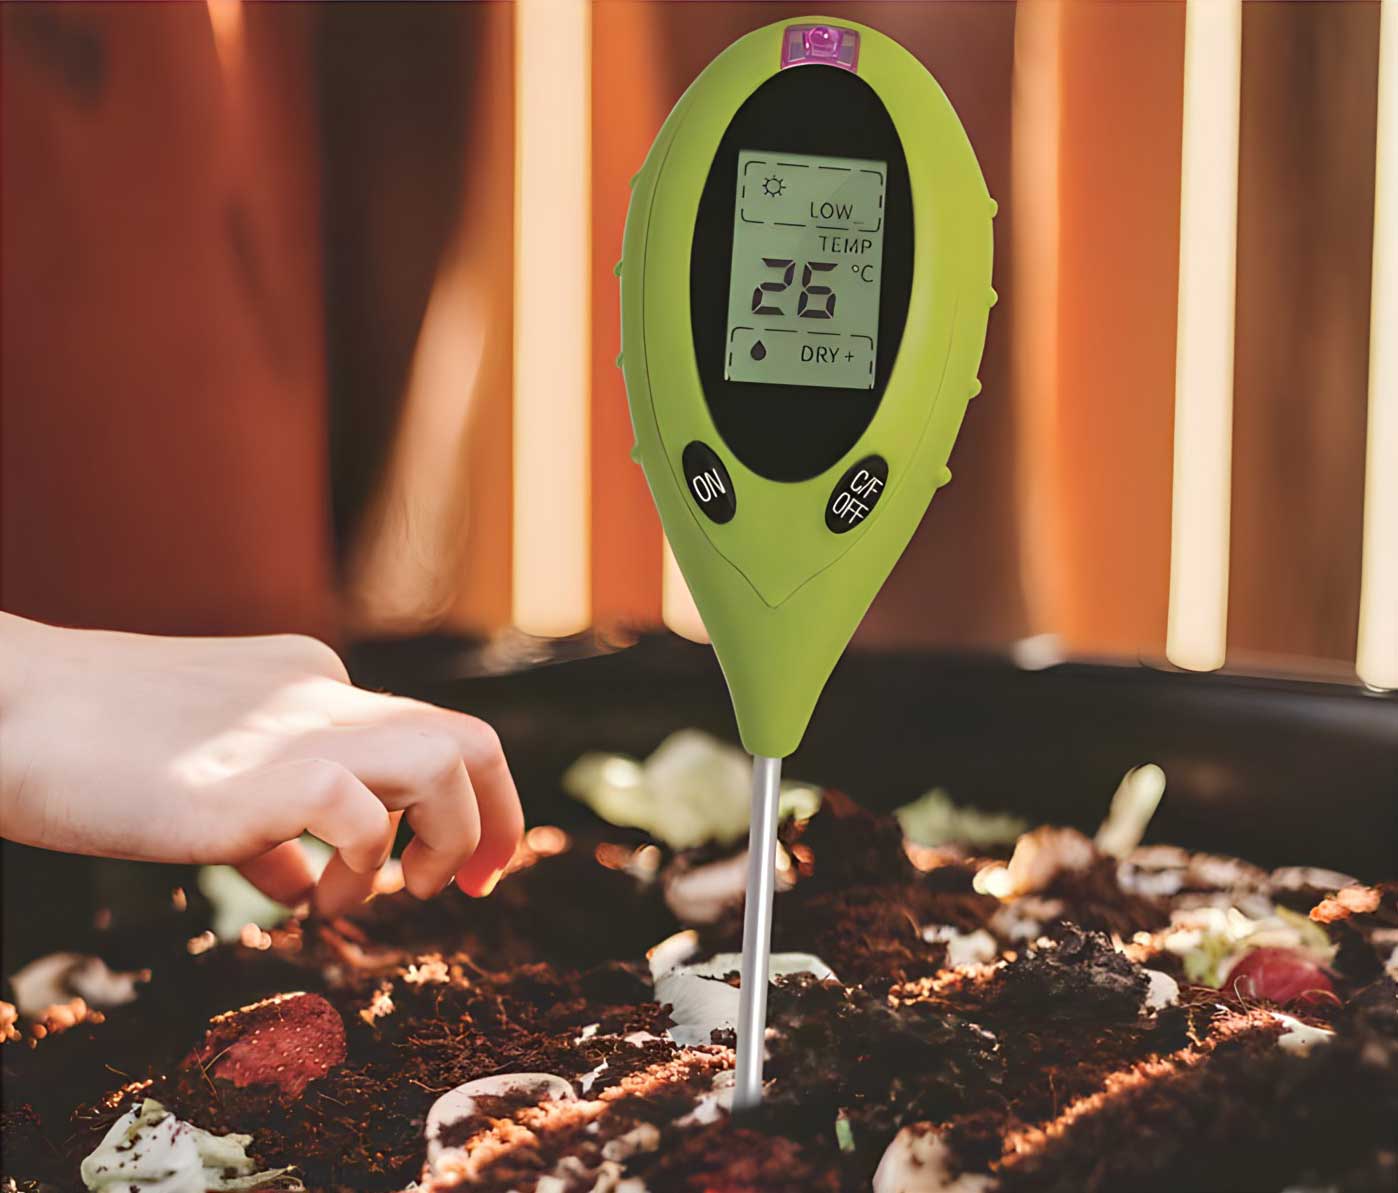 Tumbleweed - pH Tester designed to monitor pH of Garden Beds, Compost and Worm Farms